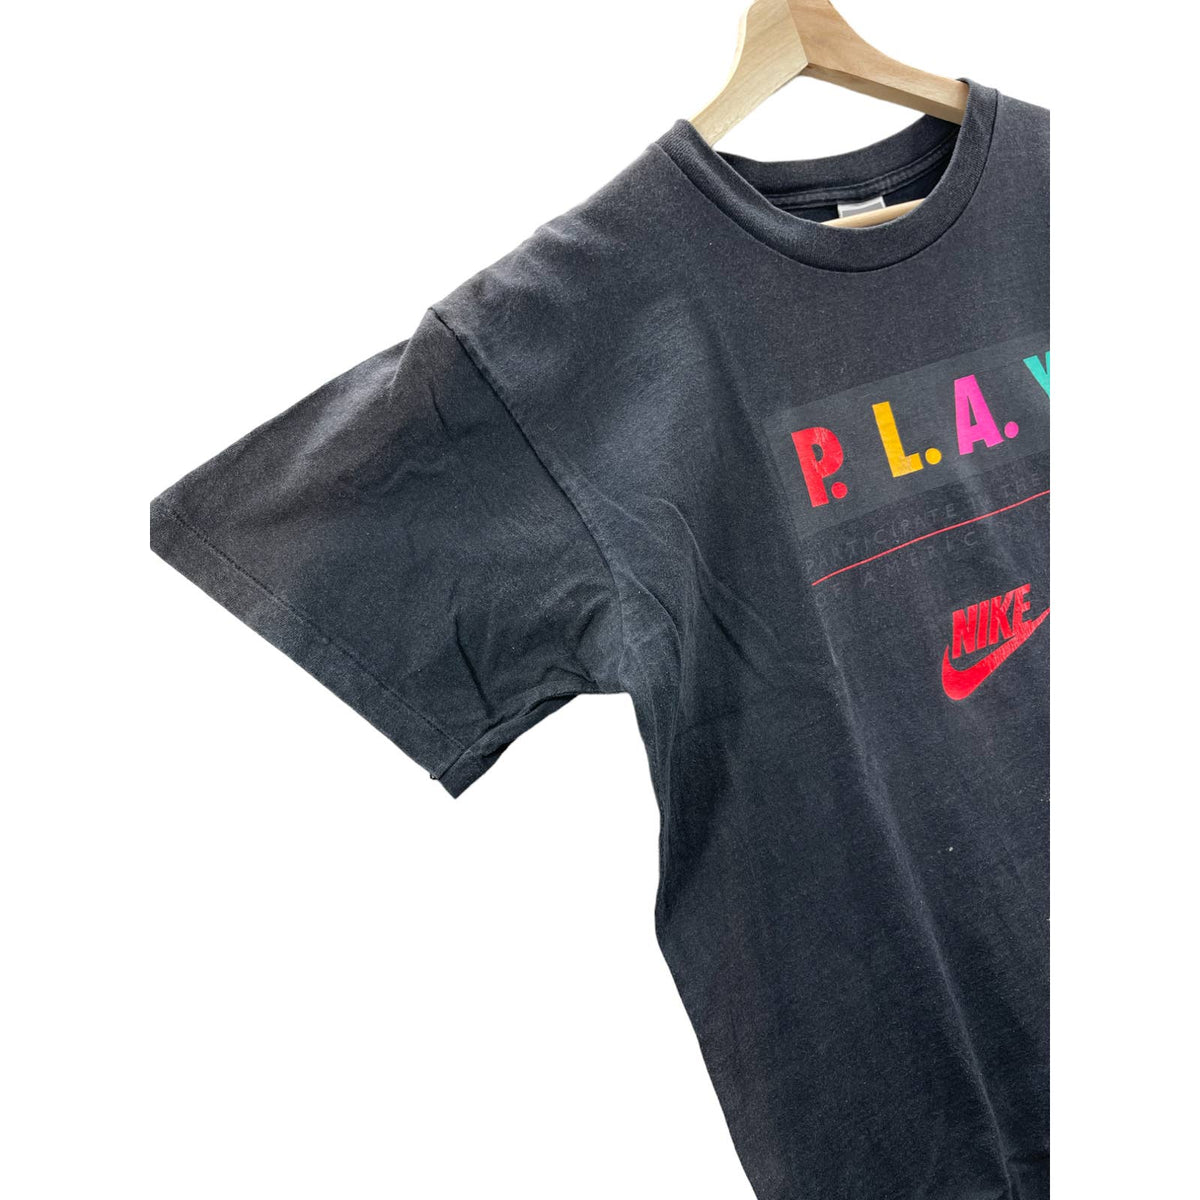 Vintage 1990's Nike P.L.A.Y. Distressed Graphic T-Shirt